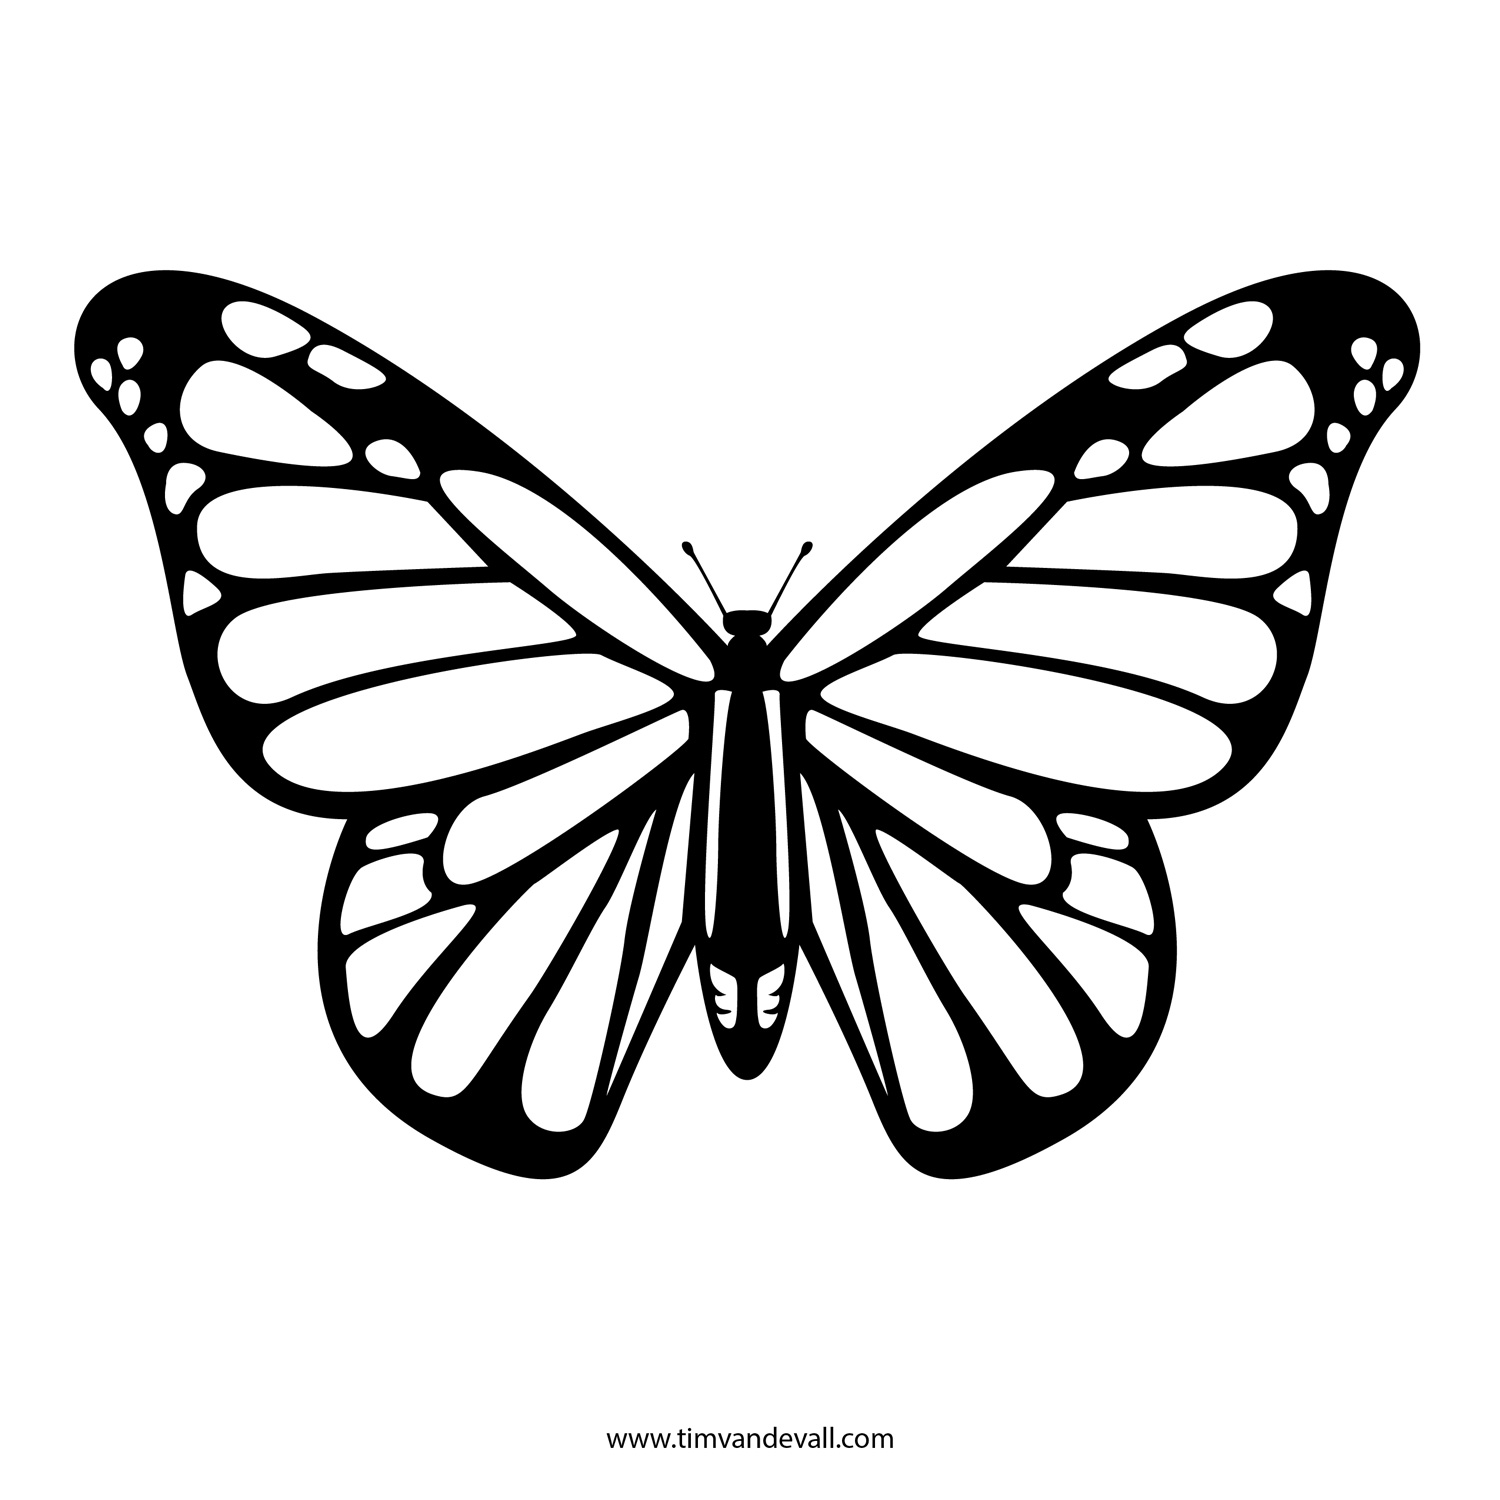 Free Butterfly Stencils To Print